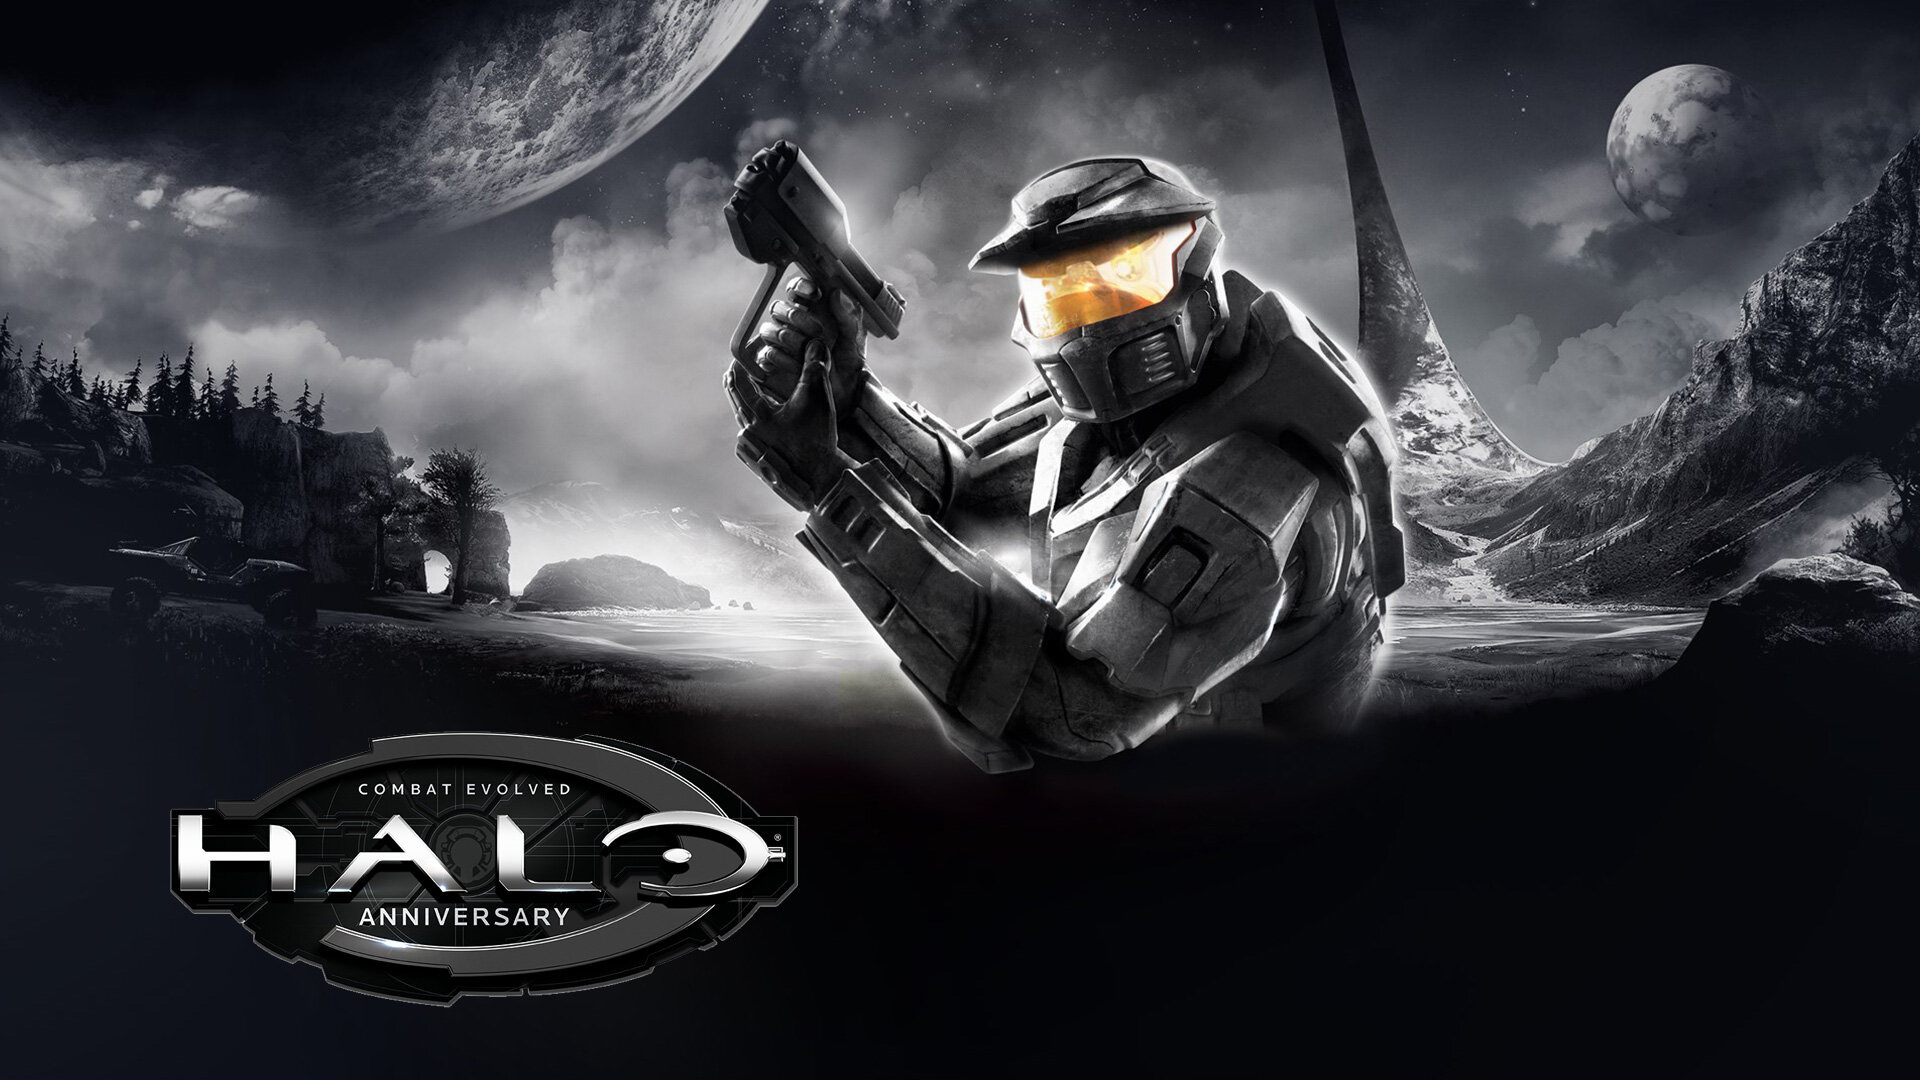 Halo CE Anniversary on PC, Launch day excitement, Maxi Geek's coverage, Master Chief's return, 1920x1080 Full HD Desktop